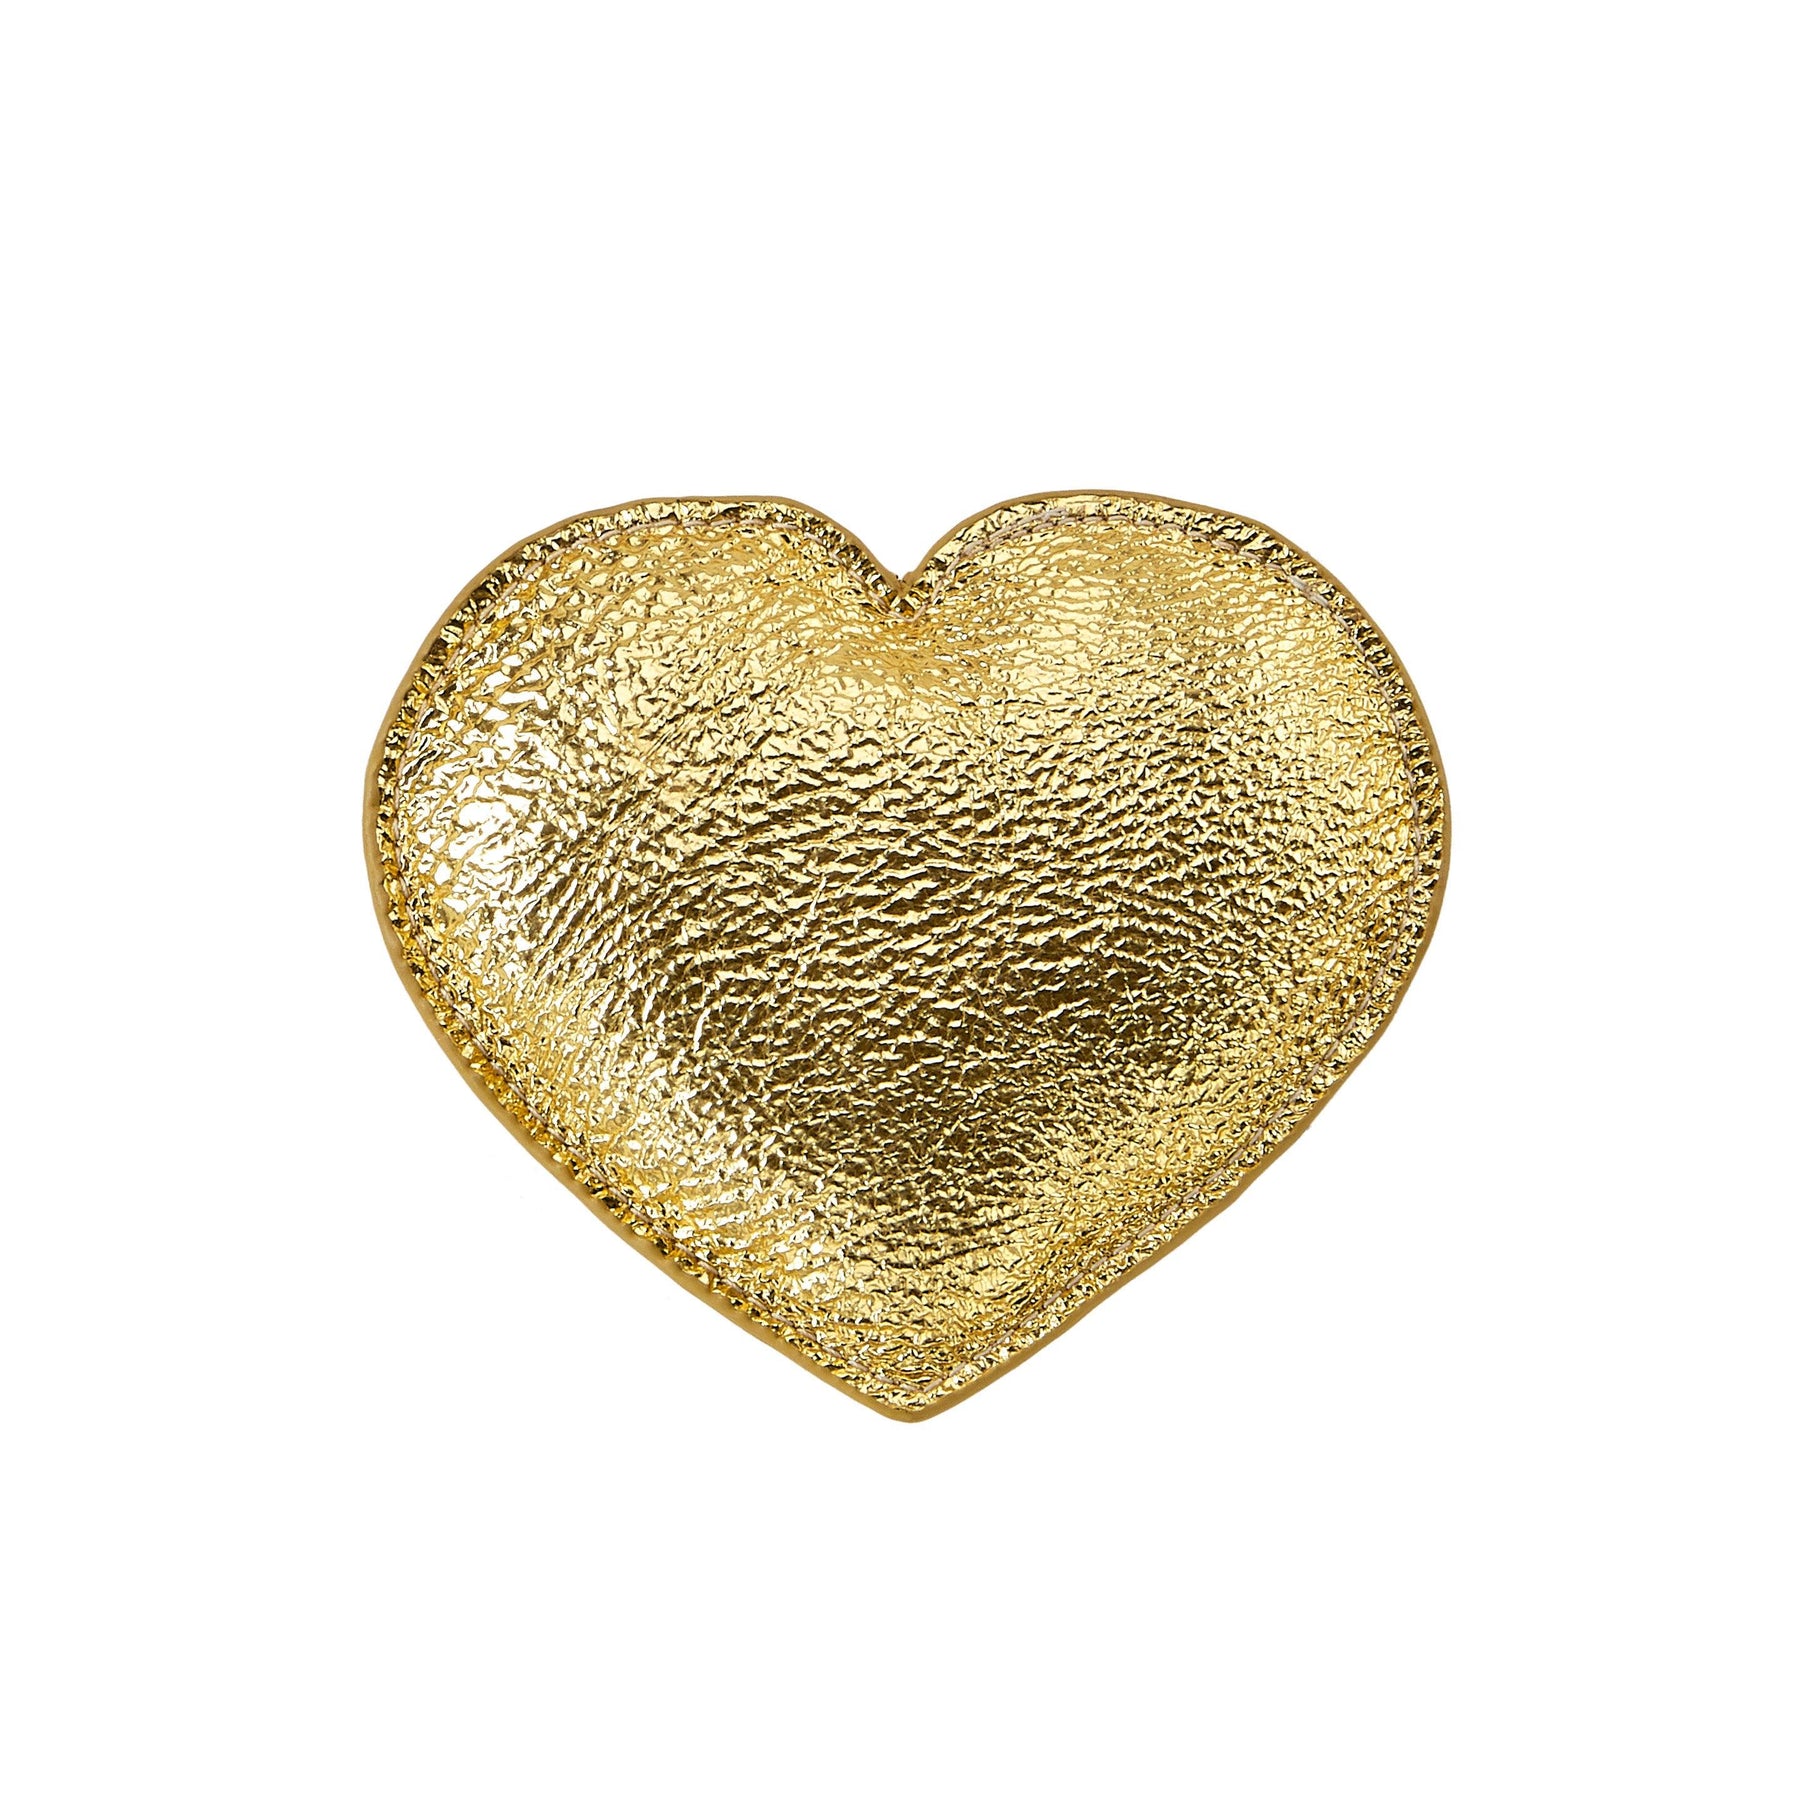 Heart Paperweight | Gold Leather - graphic image - Bluecashew Kitchen Homestead